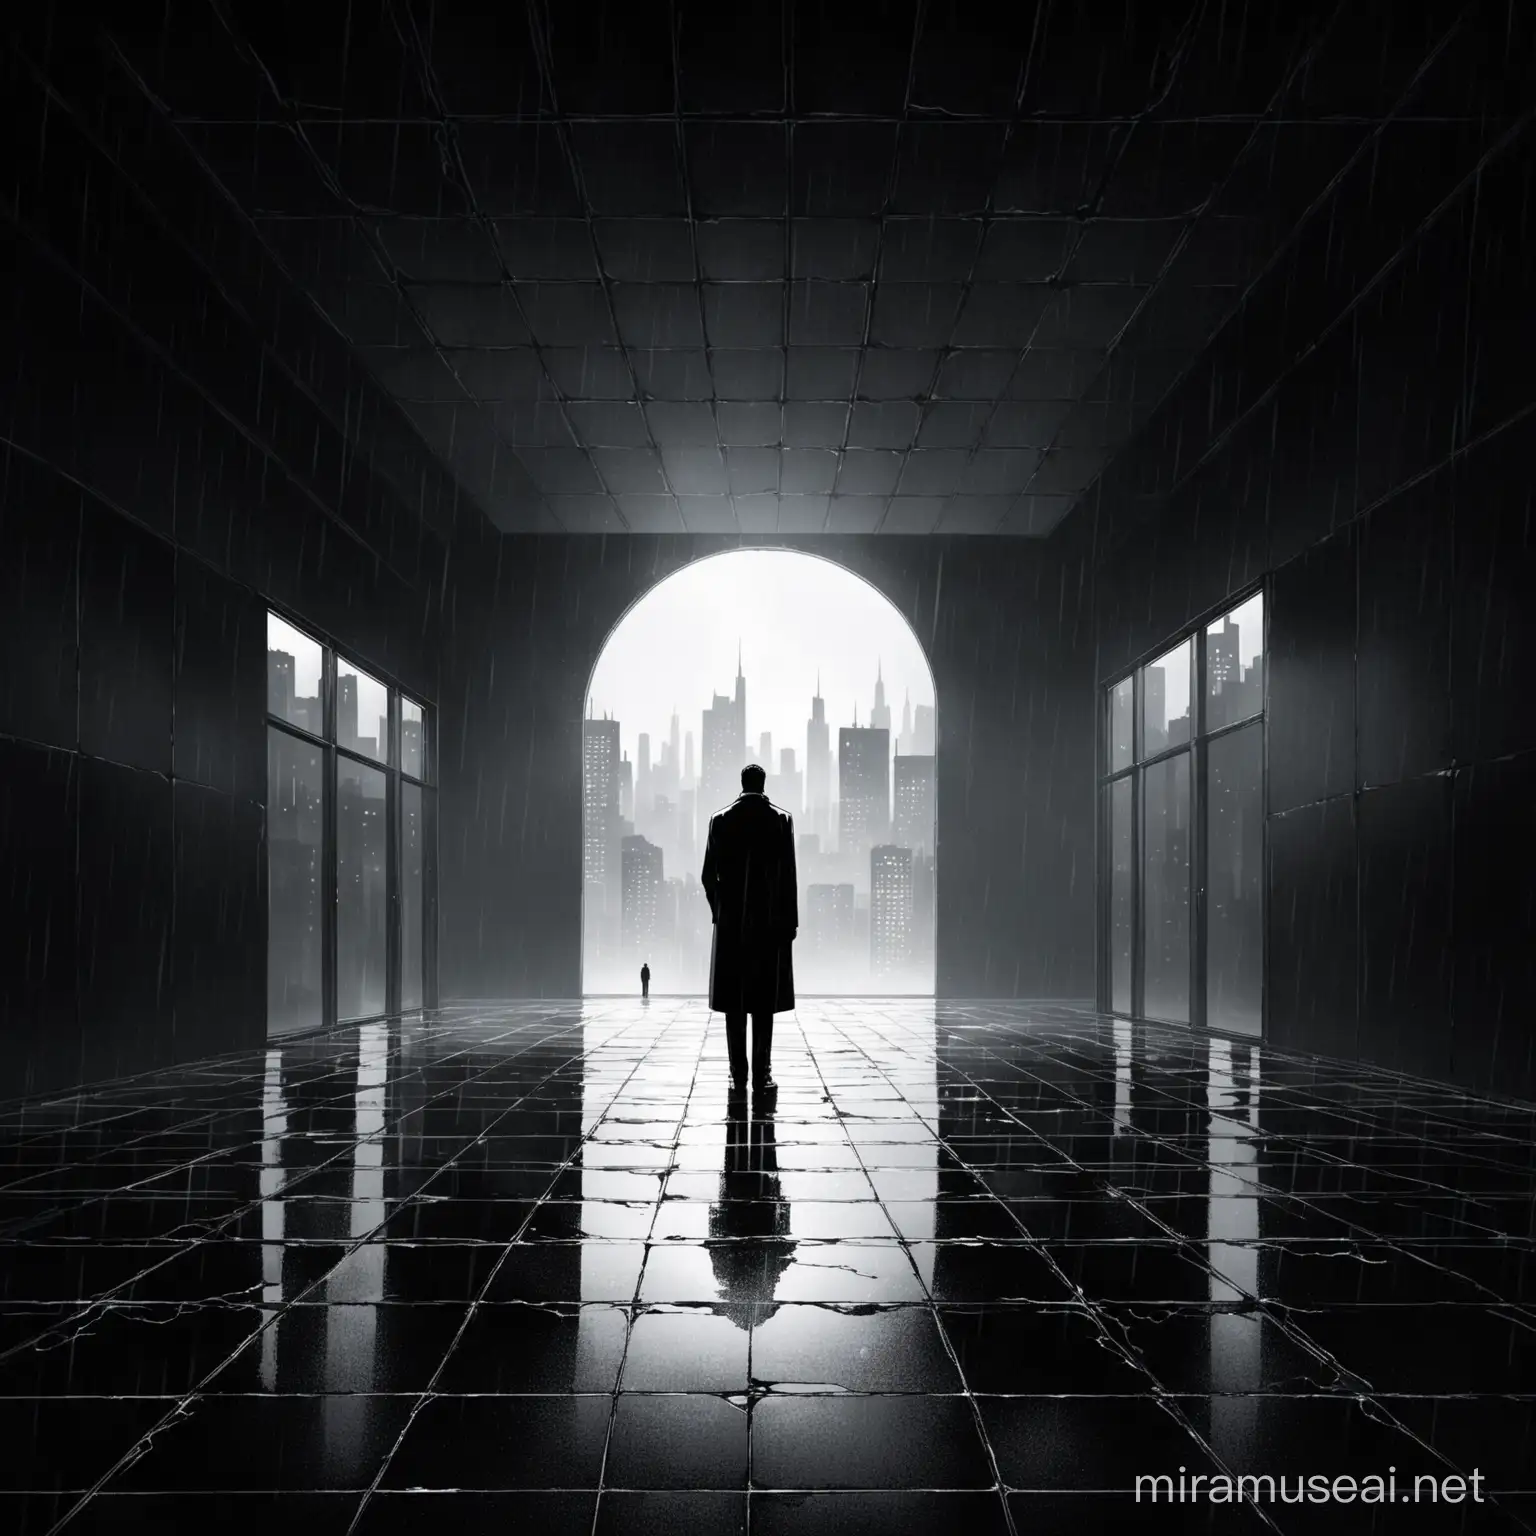  It's an empty room. A twenty something man is standing in the middle. The wall behind him is fully glazed in windows, overlooking a rainy city. That wall should be far back but centered in the composition. The man standing in the middle in a long black coat. Alone, lonely, with nothing to give. The image should be atmospheric, ethereal, smoky, black and white, stylized, a noir kind of Sin City vibe. Like comic book art. This should be album cover art. On the floor there should be a small gypsum statue of Venus, broken in 2 pieces.